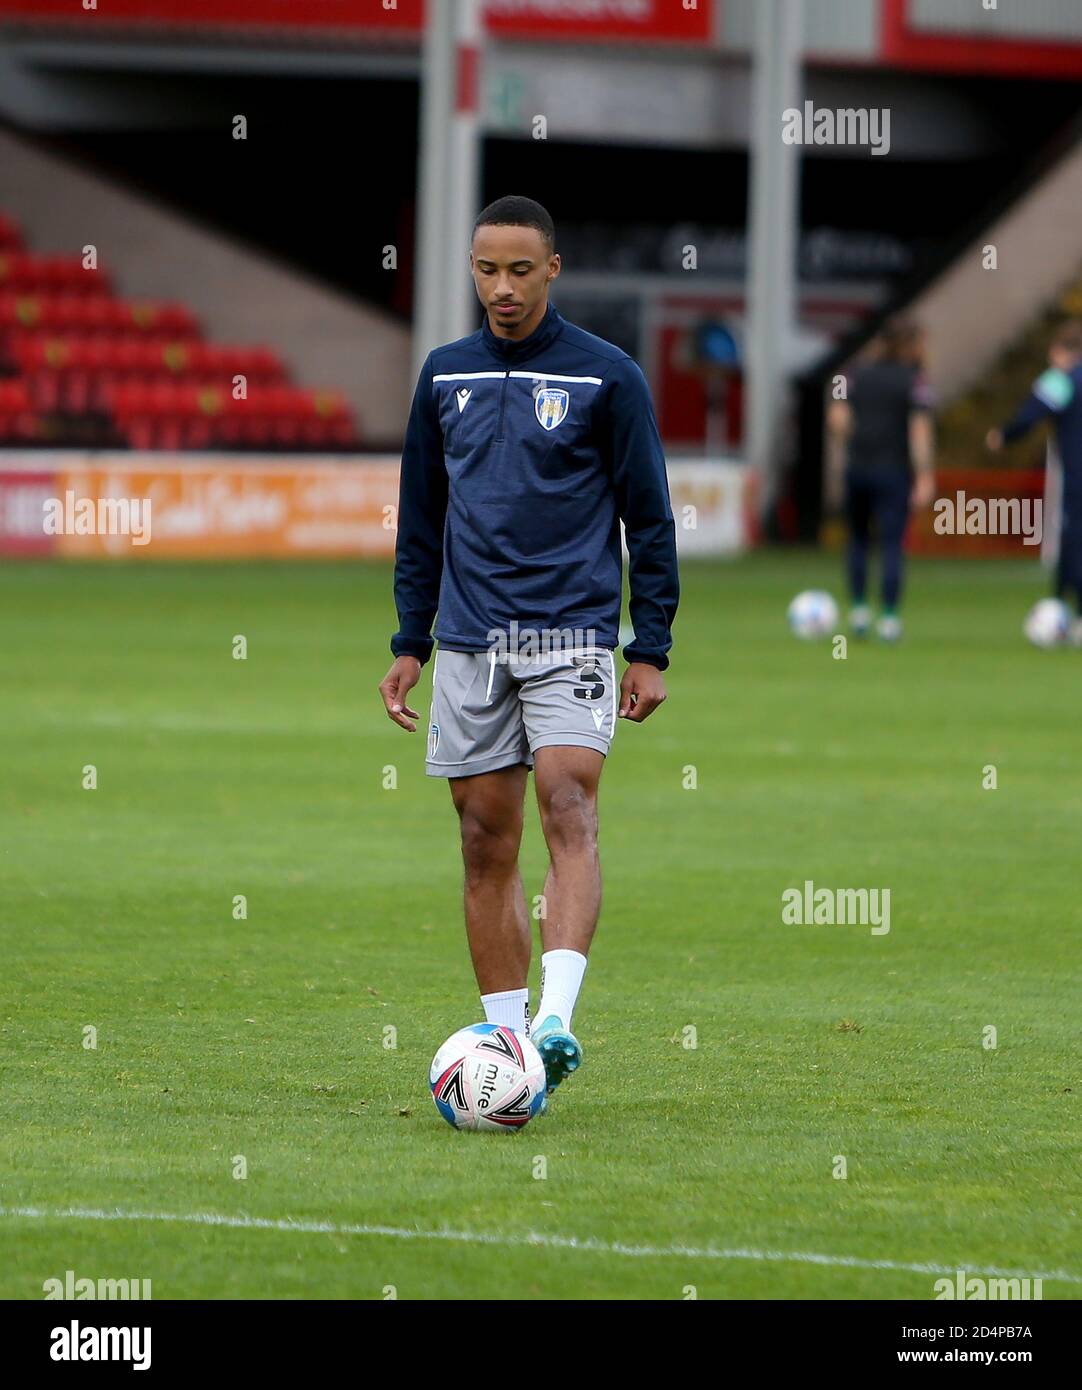 10th October 2020; Bescot Stadium, Wallsall, West Midlands, England; English Football League Two, Walsall FC versus Colchester United; Cohen Bramall of Colchester United warming up Stock Photo